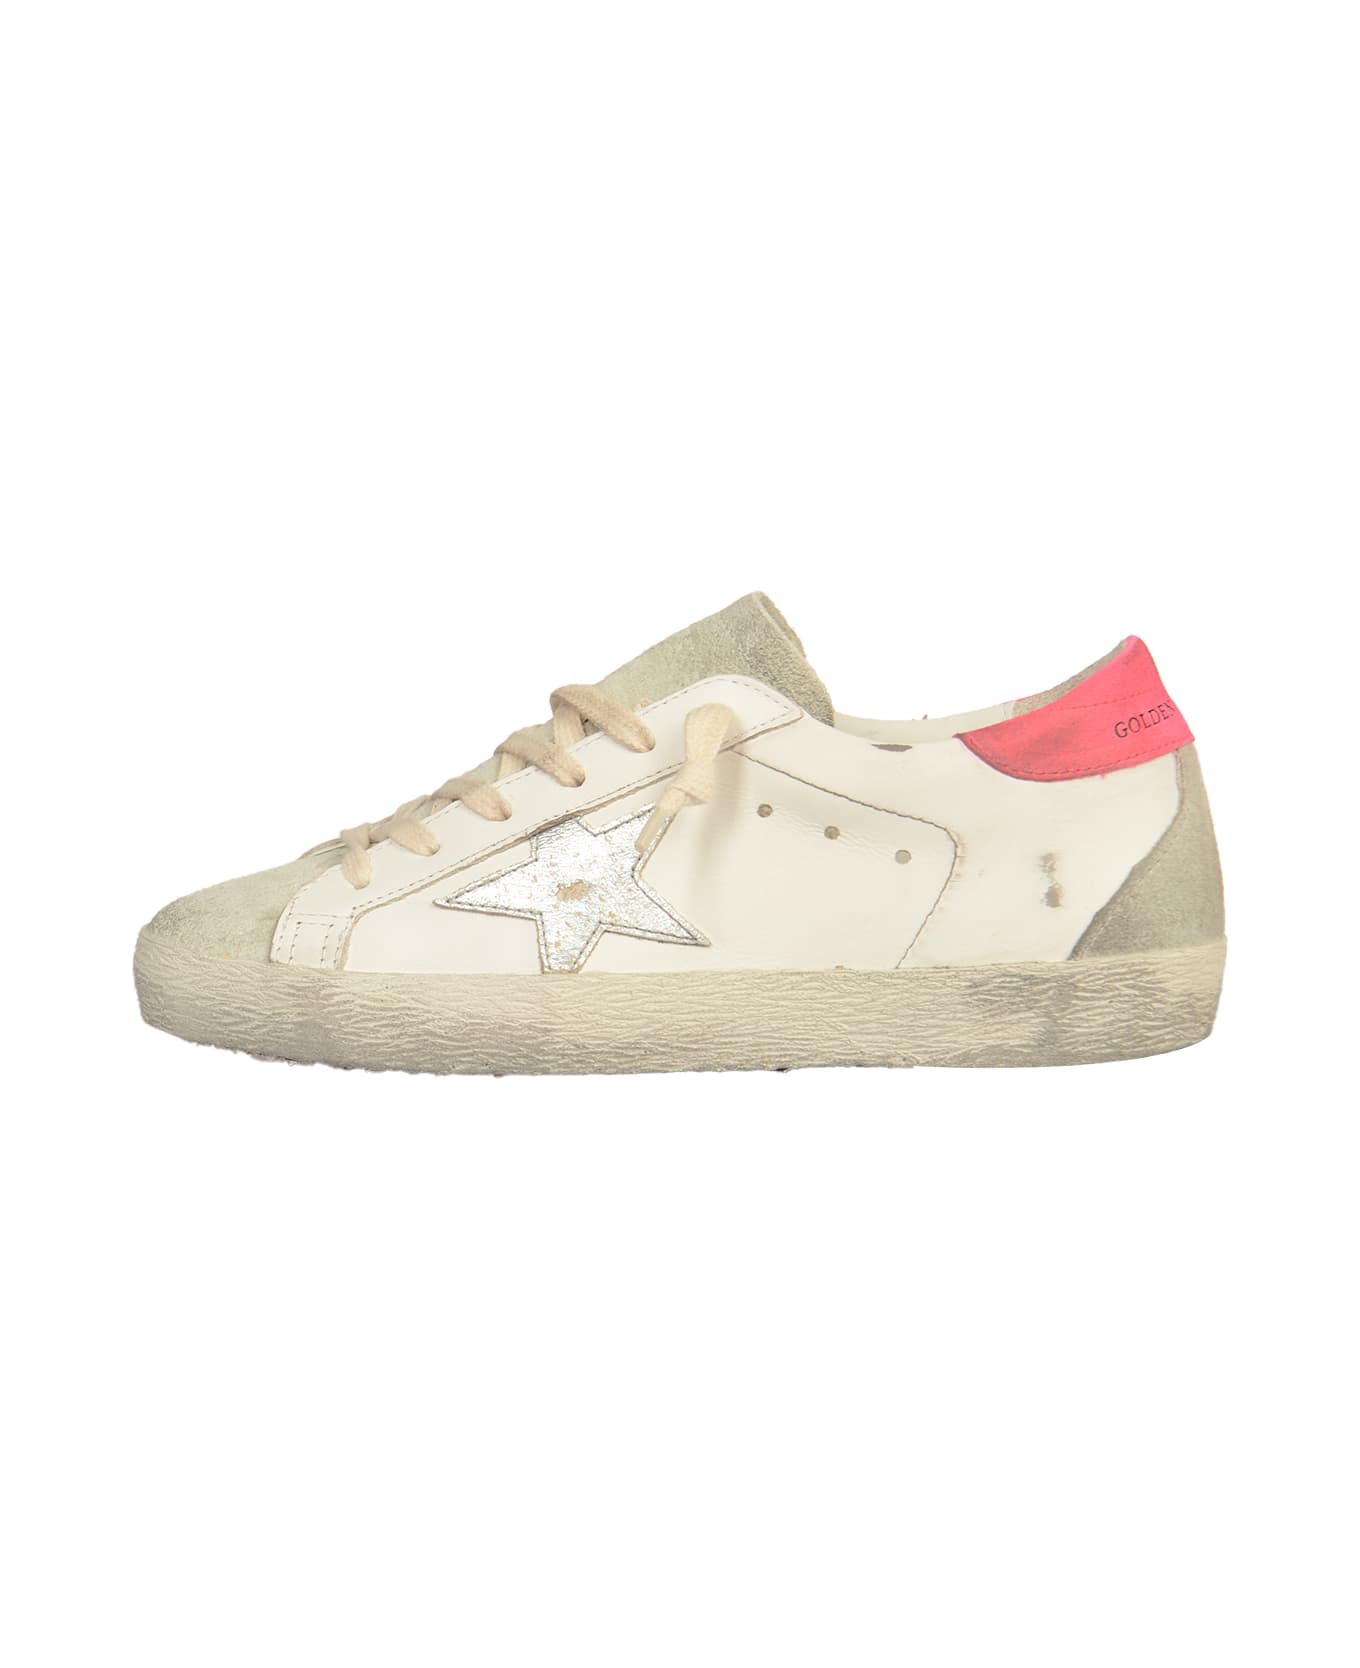 Golden Goose Super-star Classic Sneakers - White/Ice/Silver